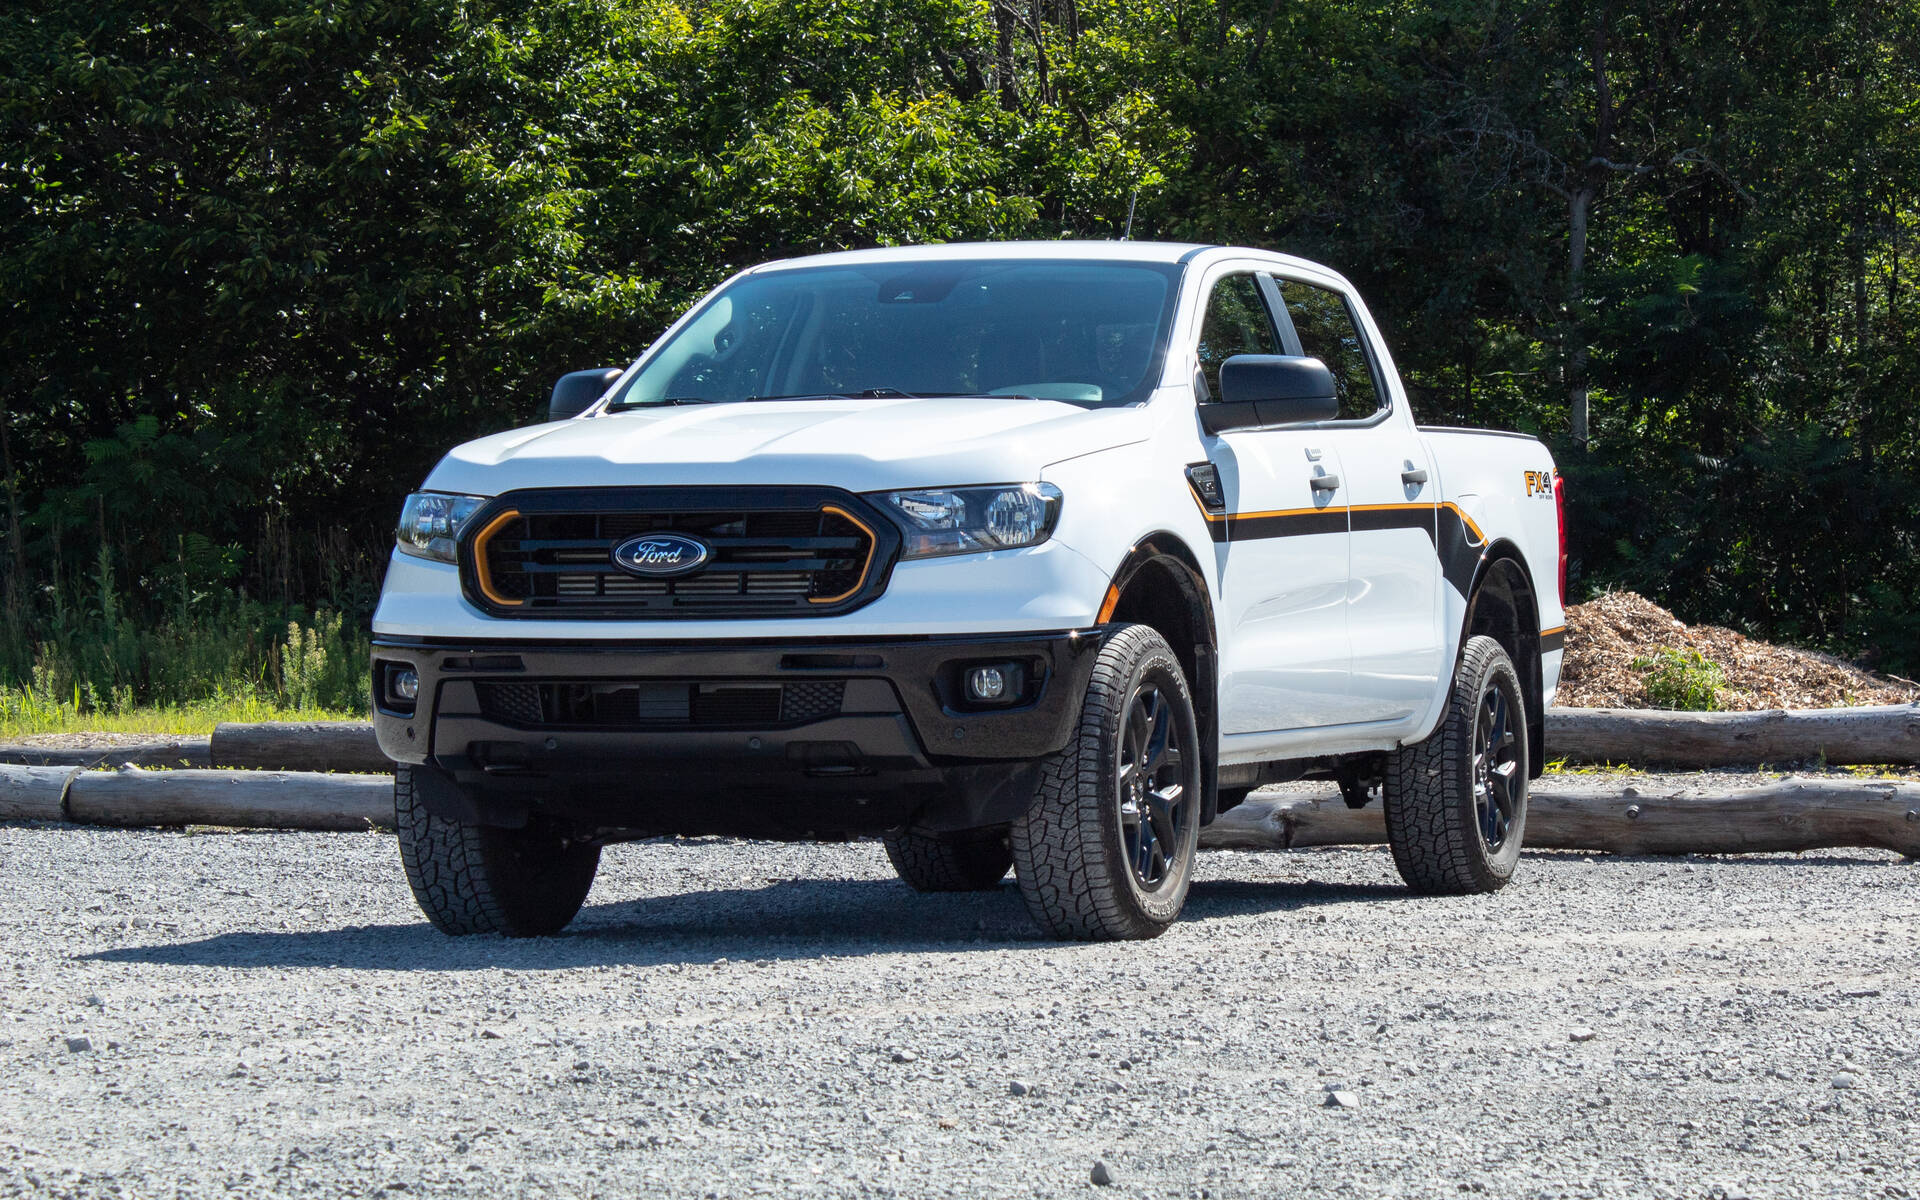 2023 Ford Ranger - News, reviews, picture galleries and videos